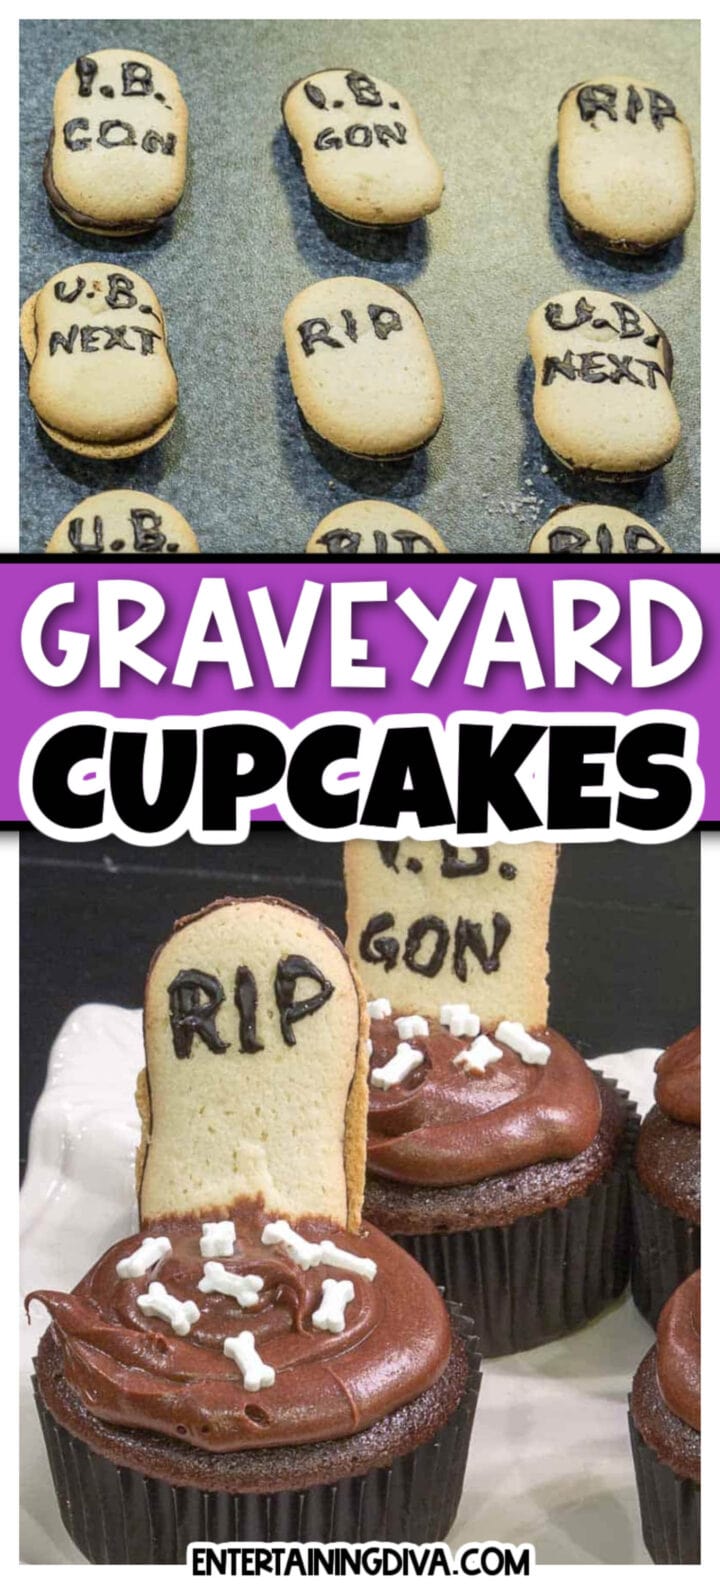 Halloween-themed cupcakes decorated as a graveyard.